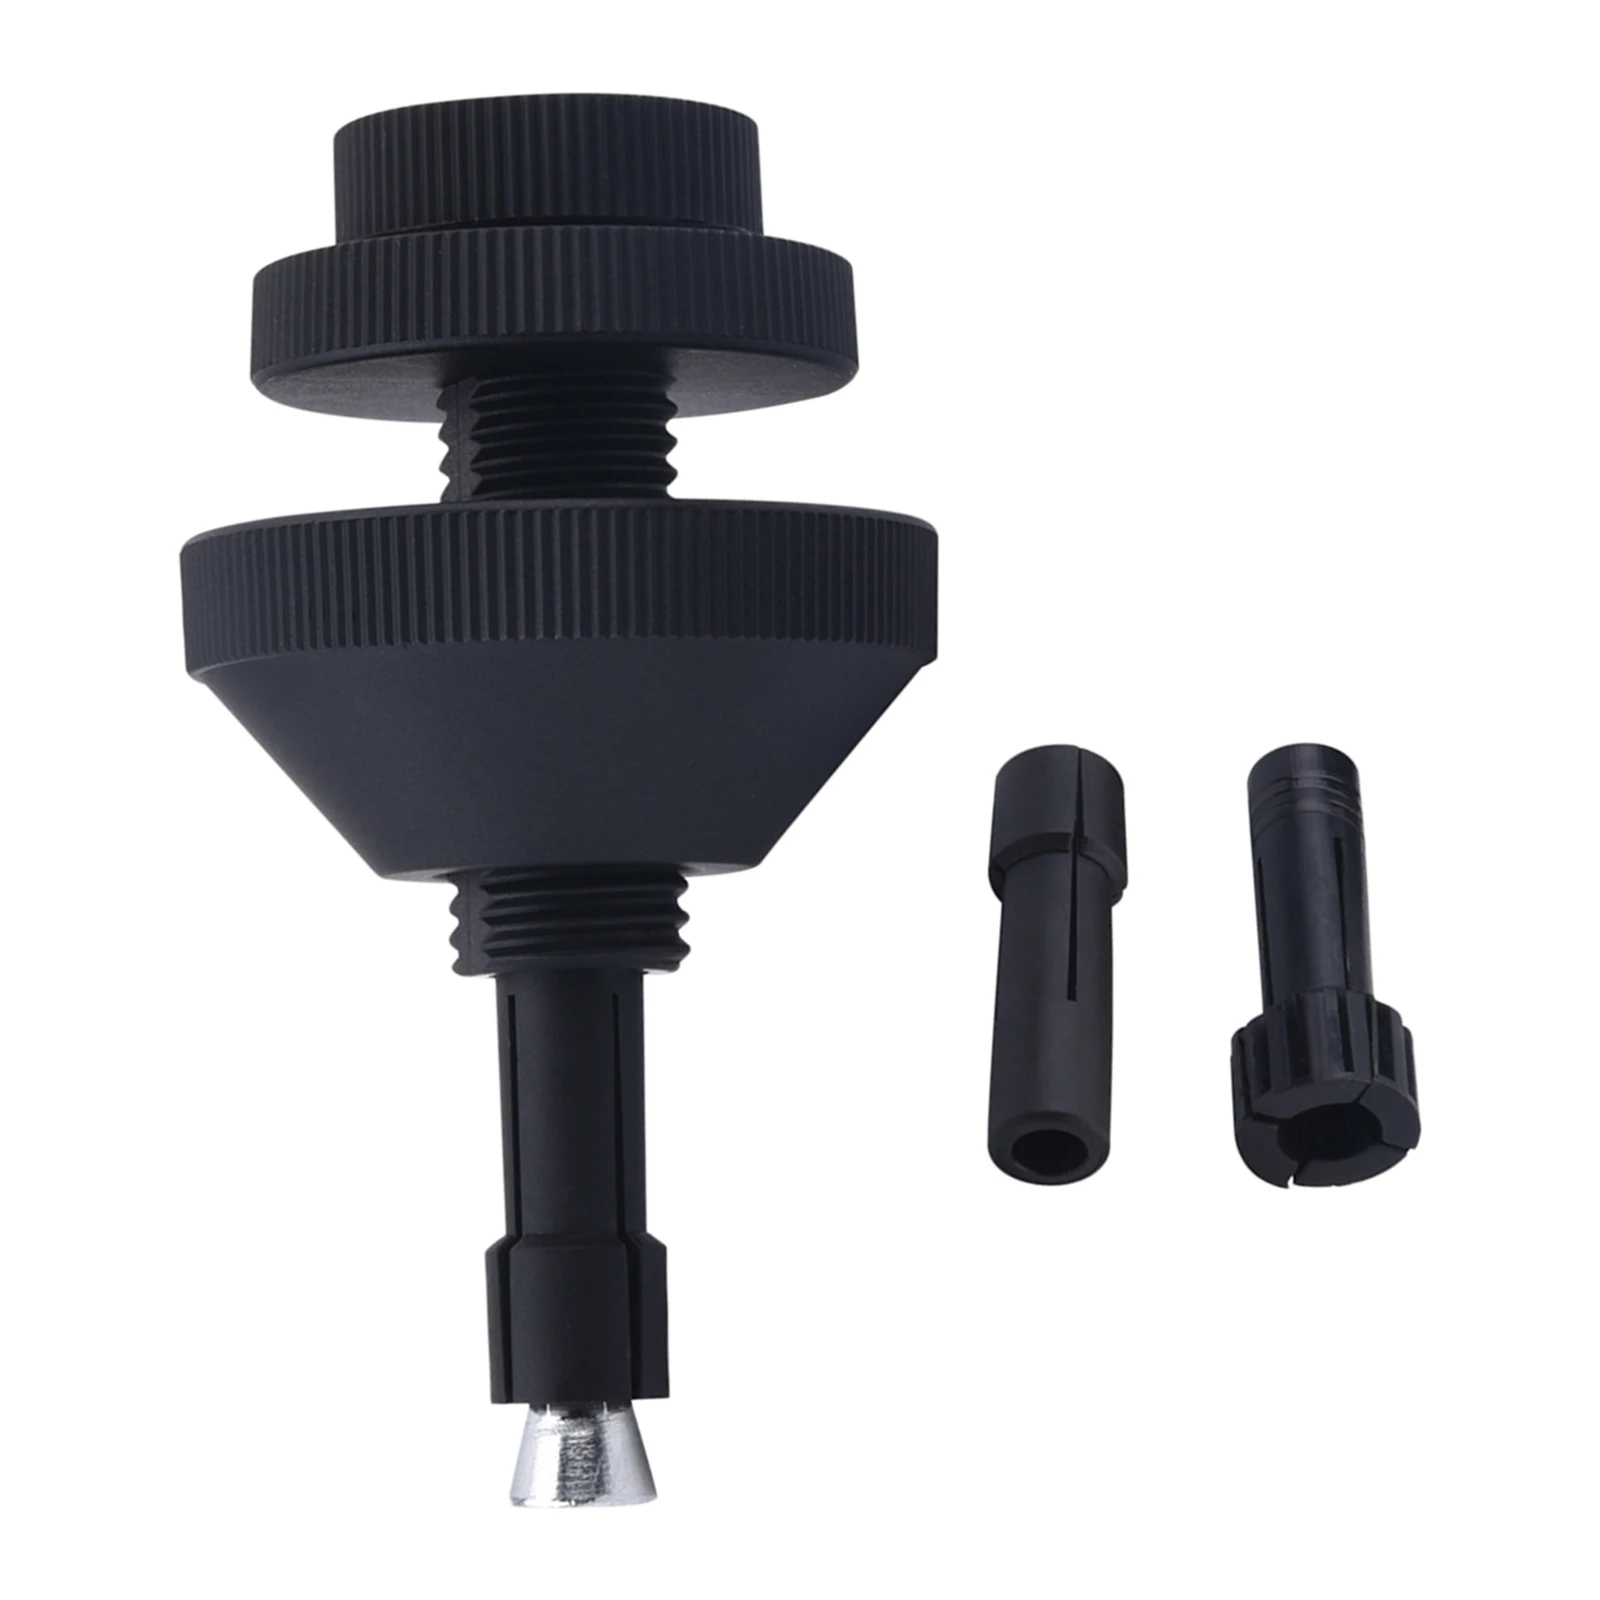 Auto Clutch Hole Corrector Clutch Alignment Centering Tool Heat Resistance Disassembly Calibration Tool Range 12.421mm